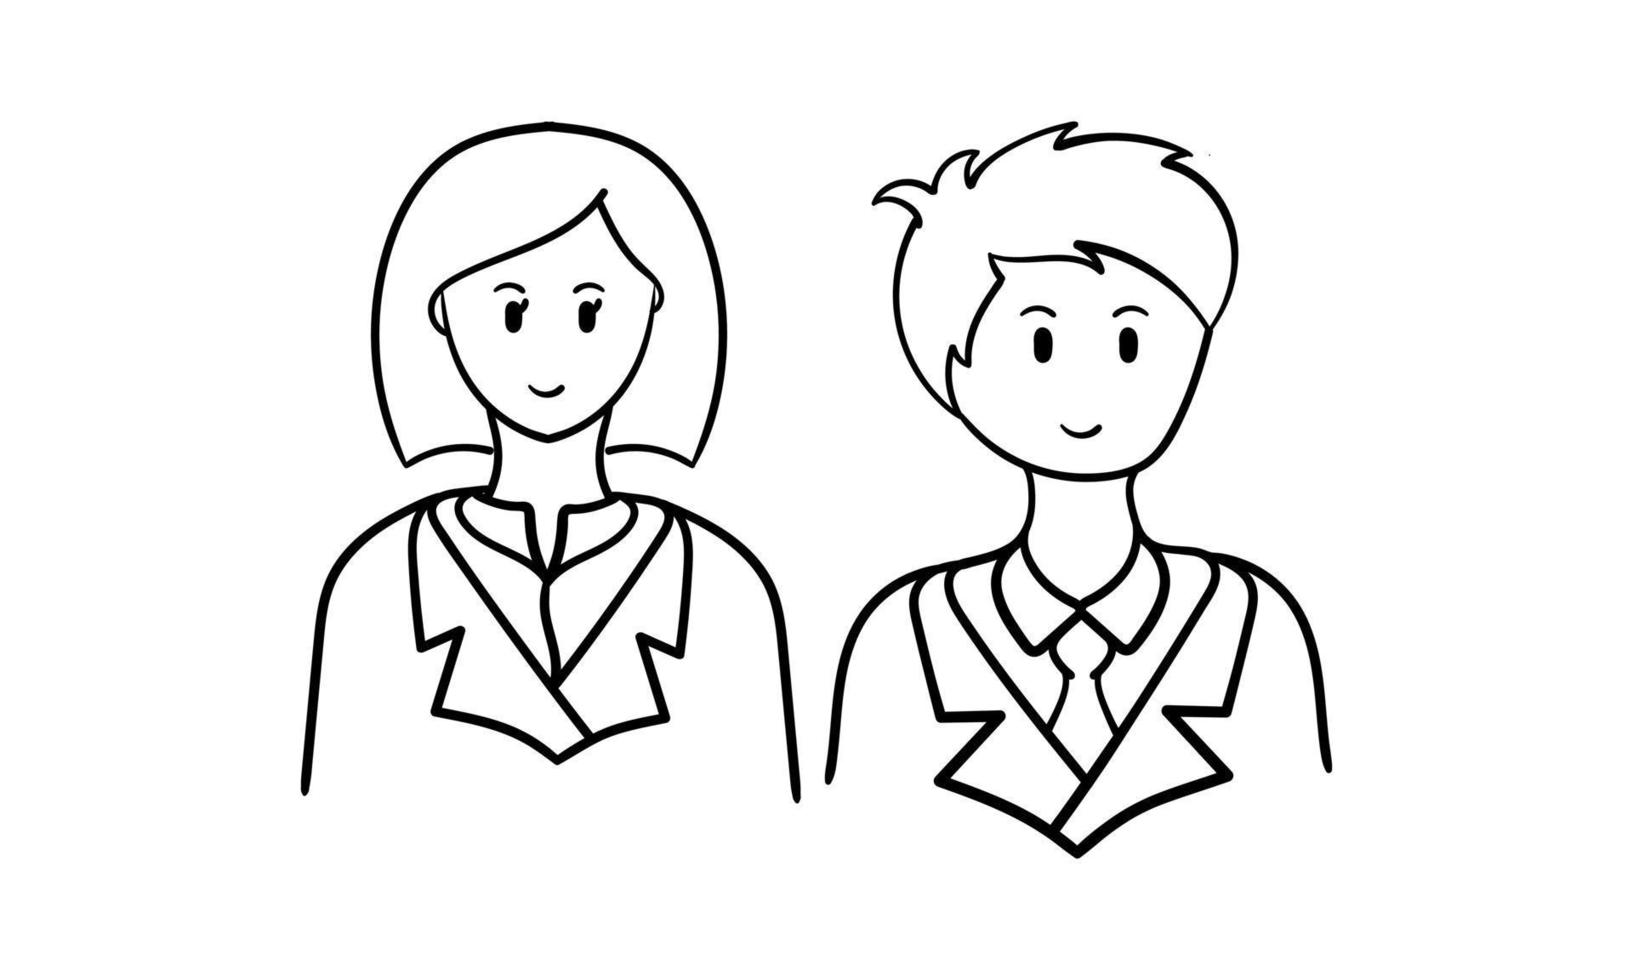 hand drawn illustration of a career man and woman vector